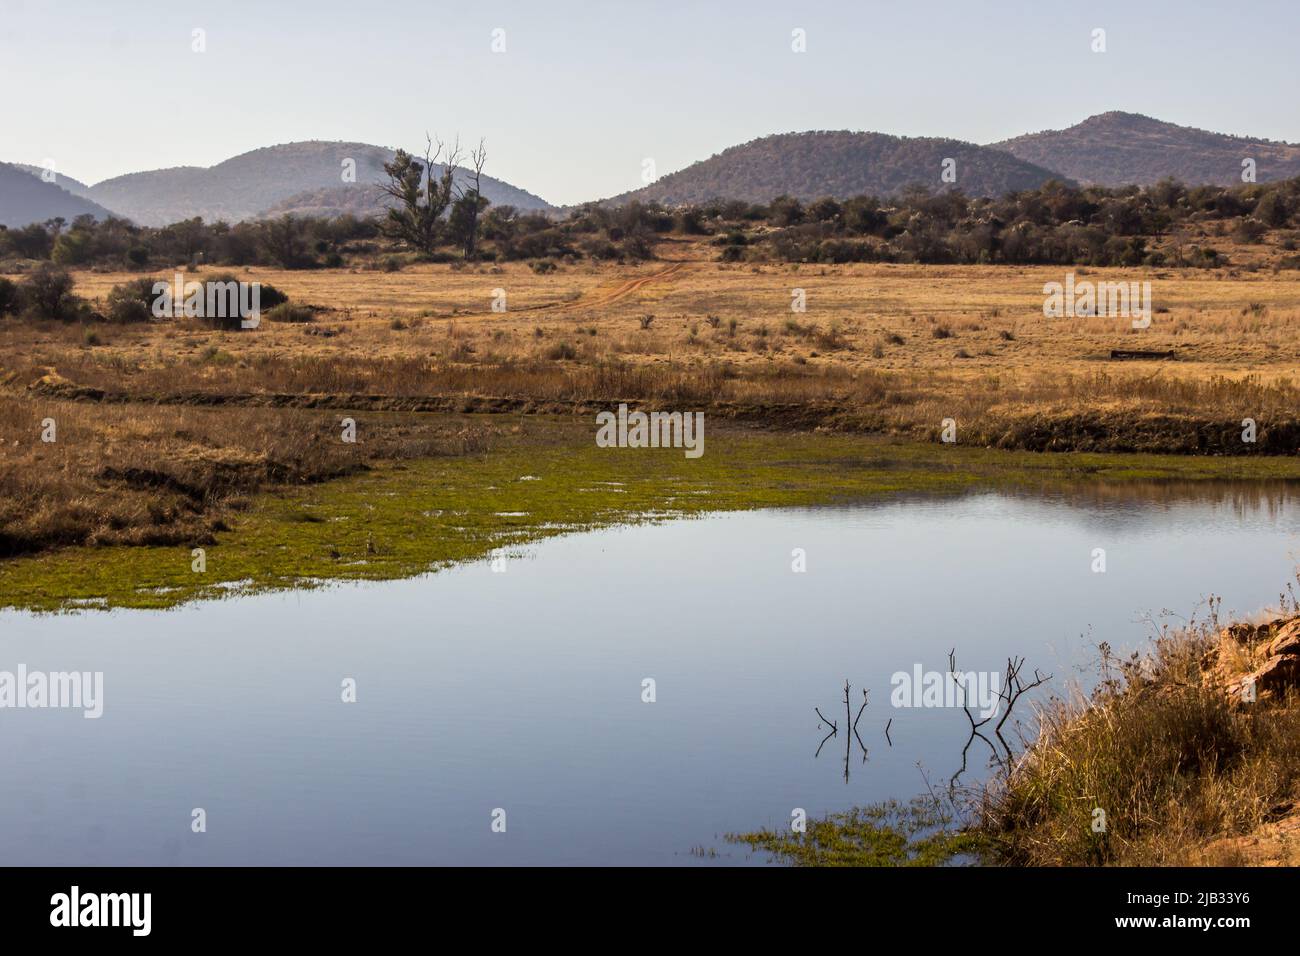 A small lake, in the bushveld of rural South Africa, with the hills of the Vredefort dome in the background Stock Photo